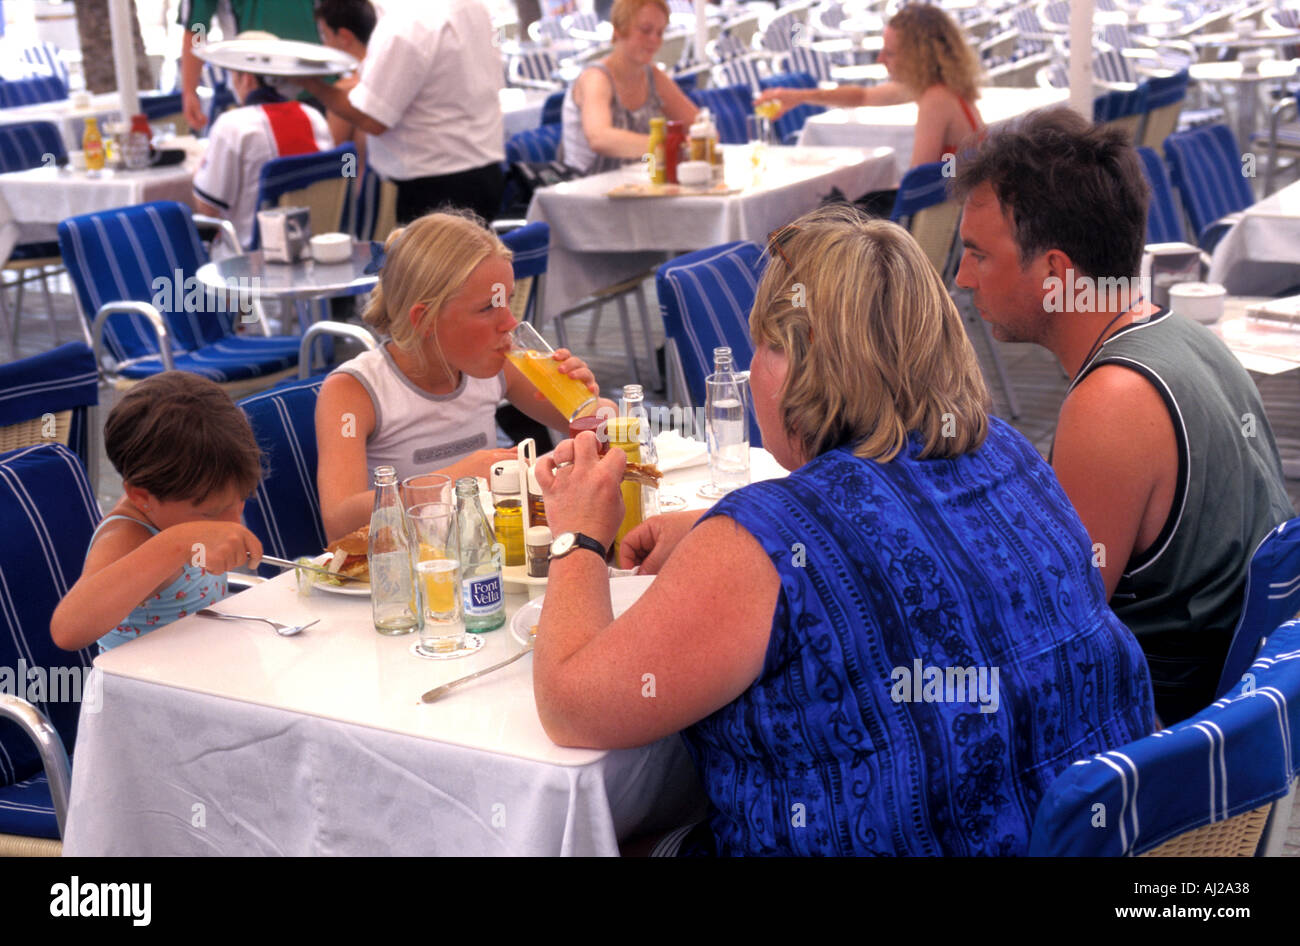 British family eating lunch outdoors at restaurant in San Antonio Stock Photo